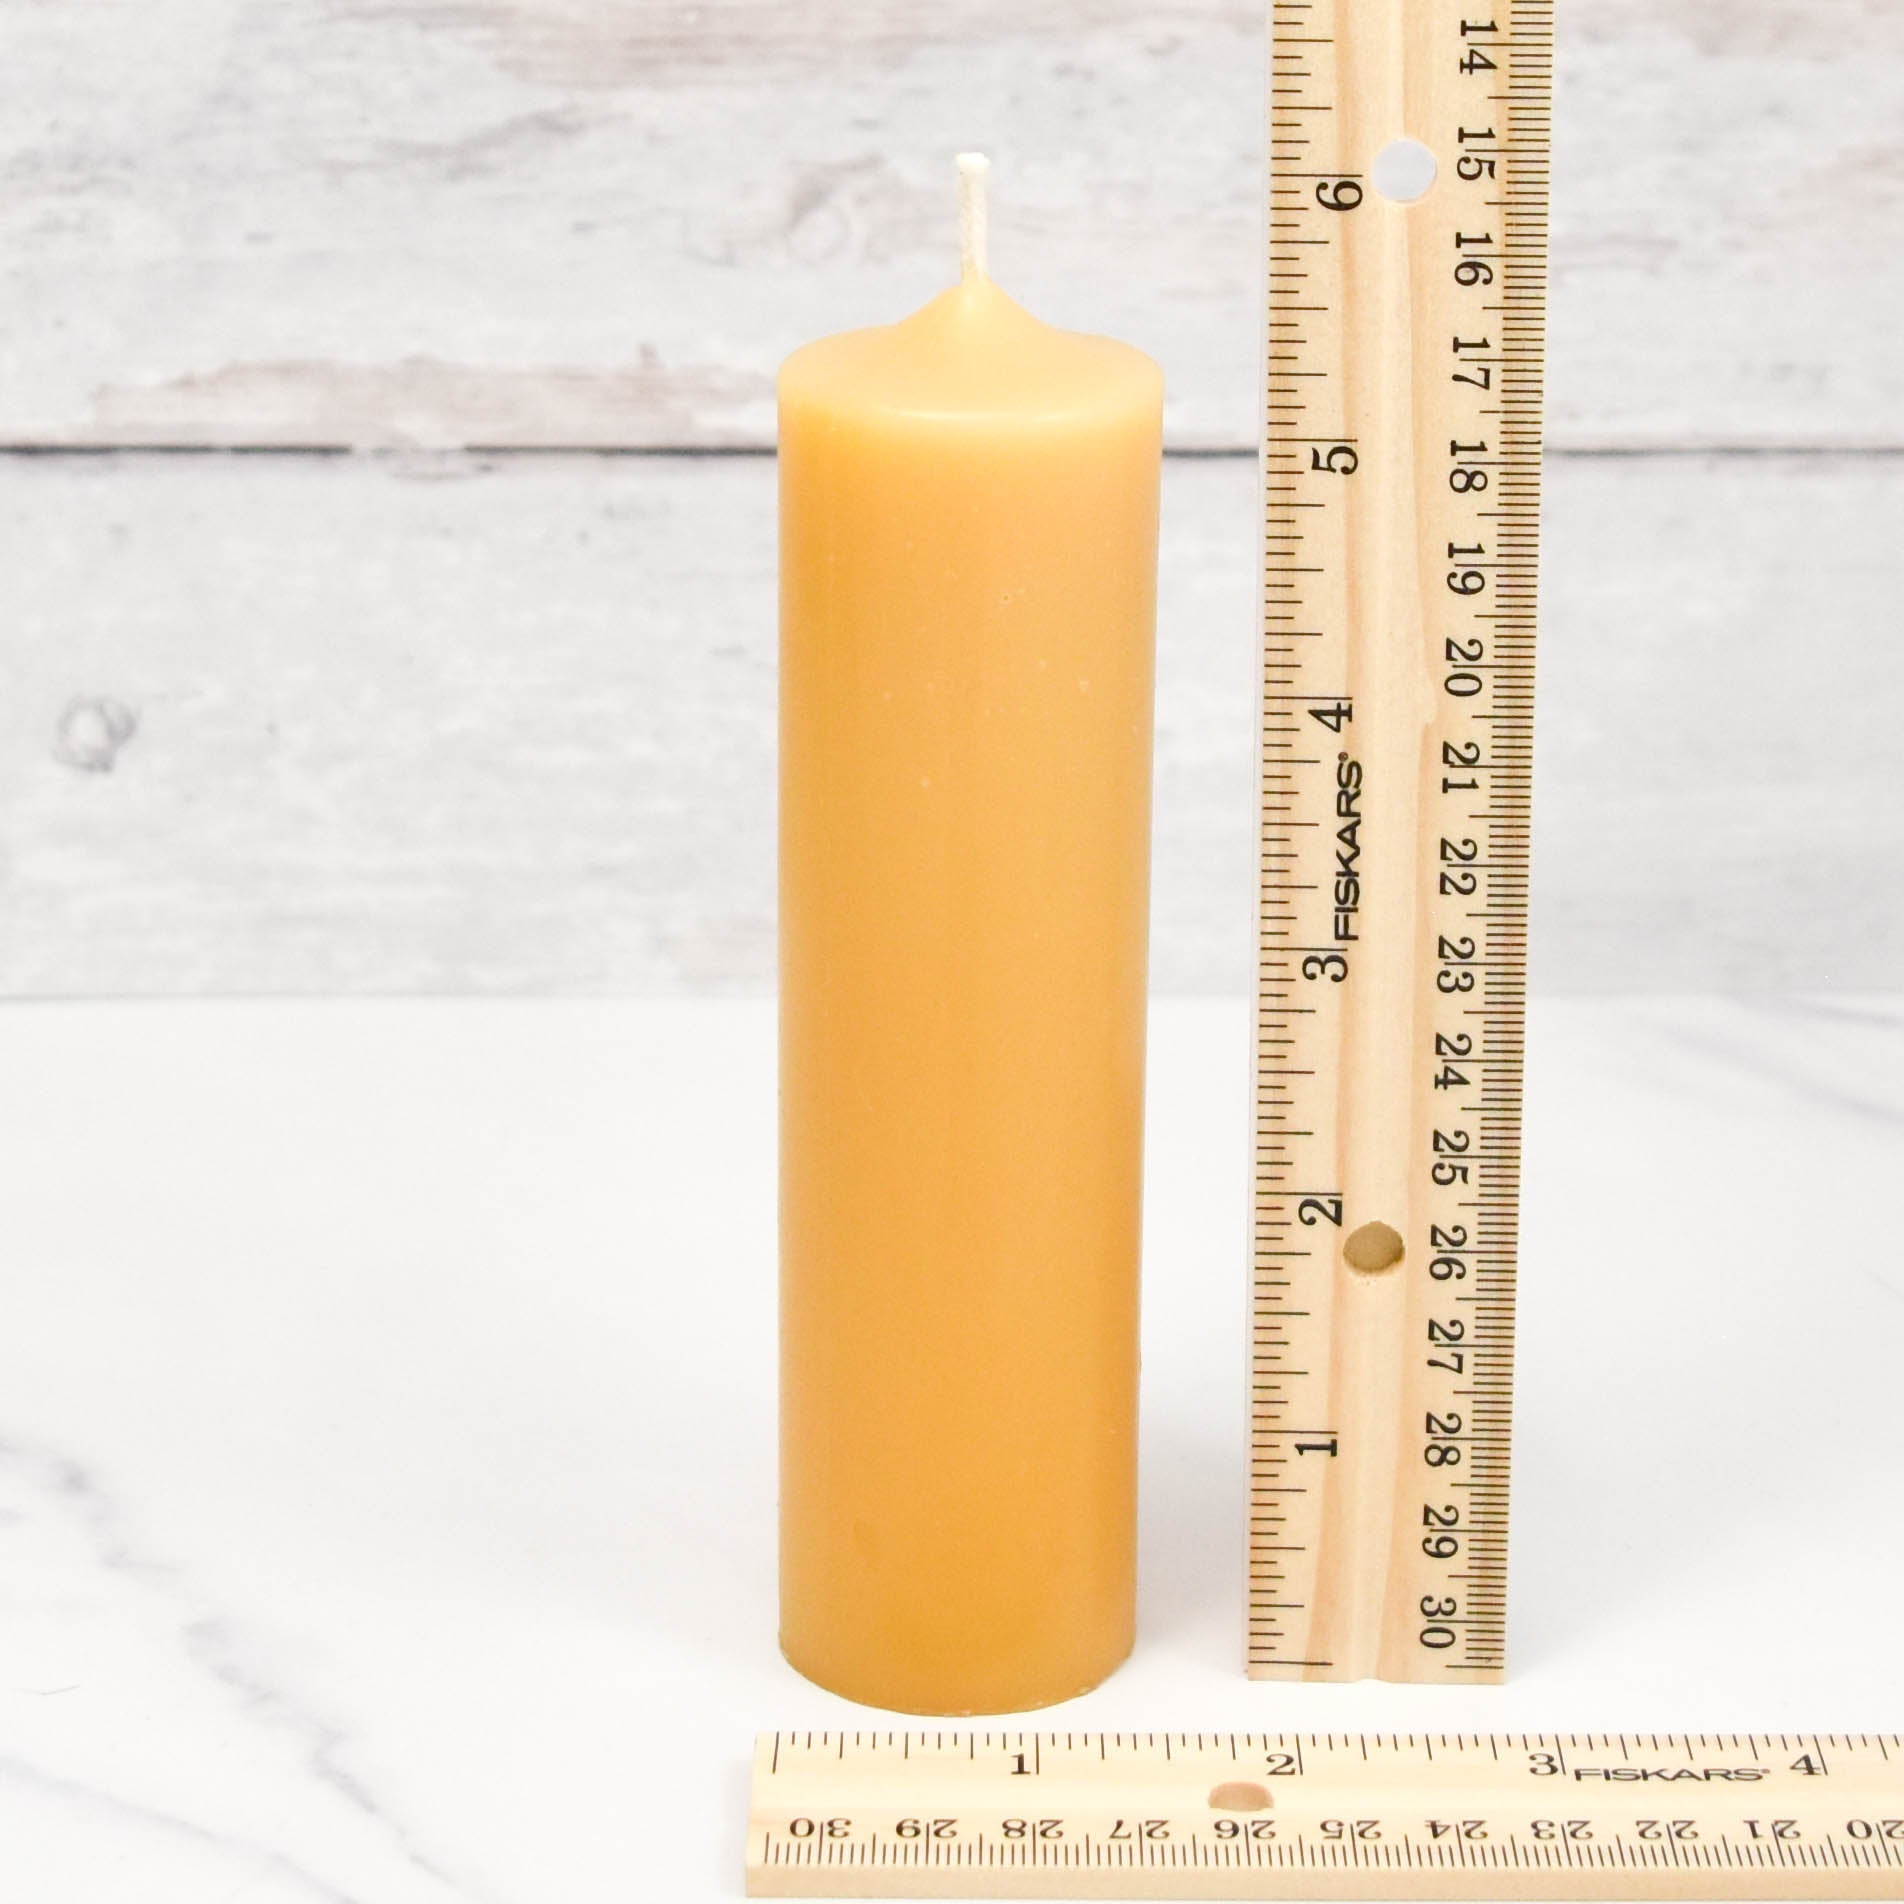 Honey Candles - 6" Natural Column Beeswax Candle